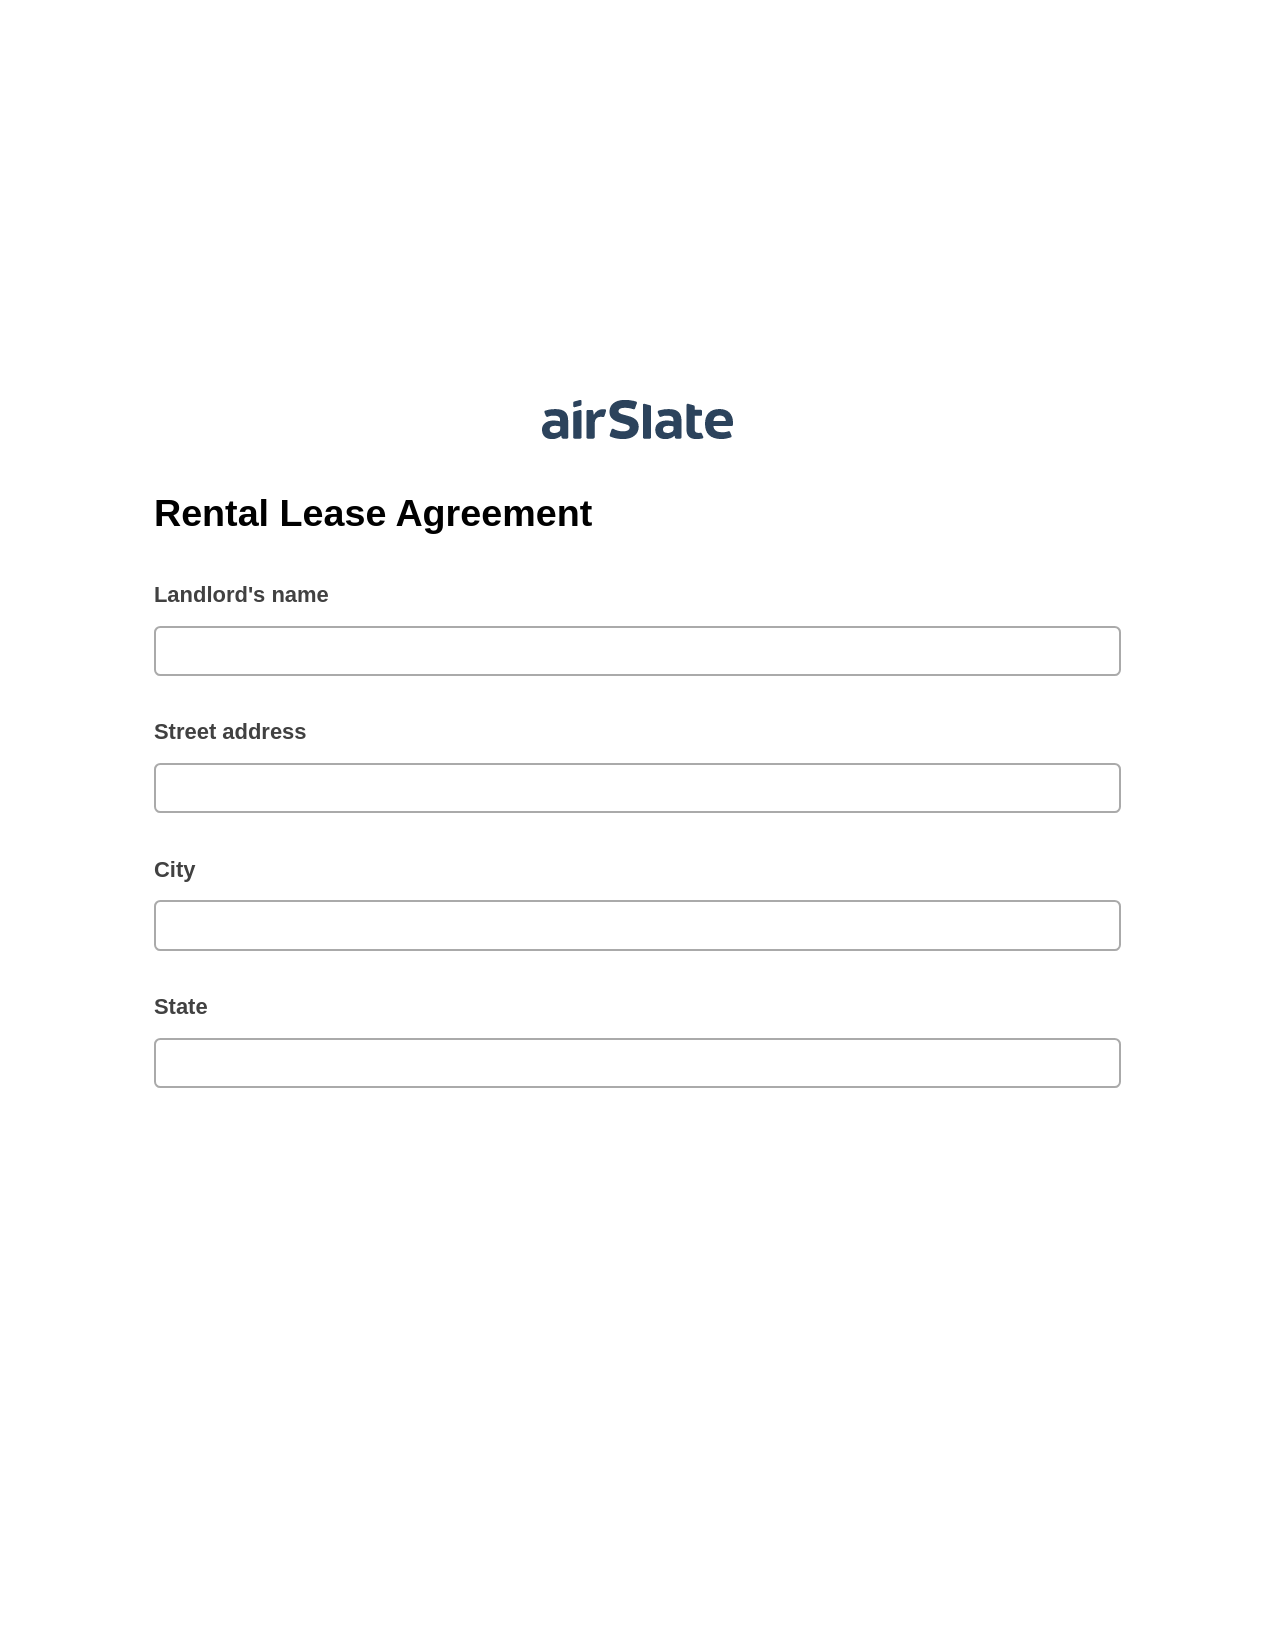 Rental Lease Agreement Pre-fill from MySQL Dropdown Options Bot, Create QuickBooks invoice Bot, Export to Salesforce Bot